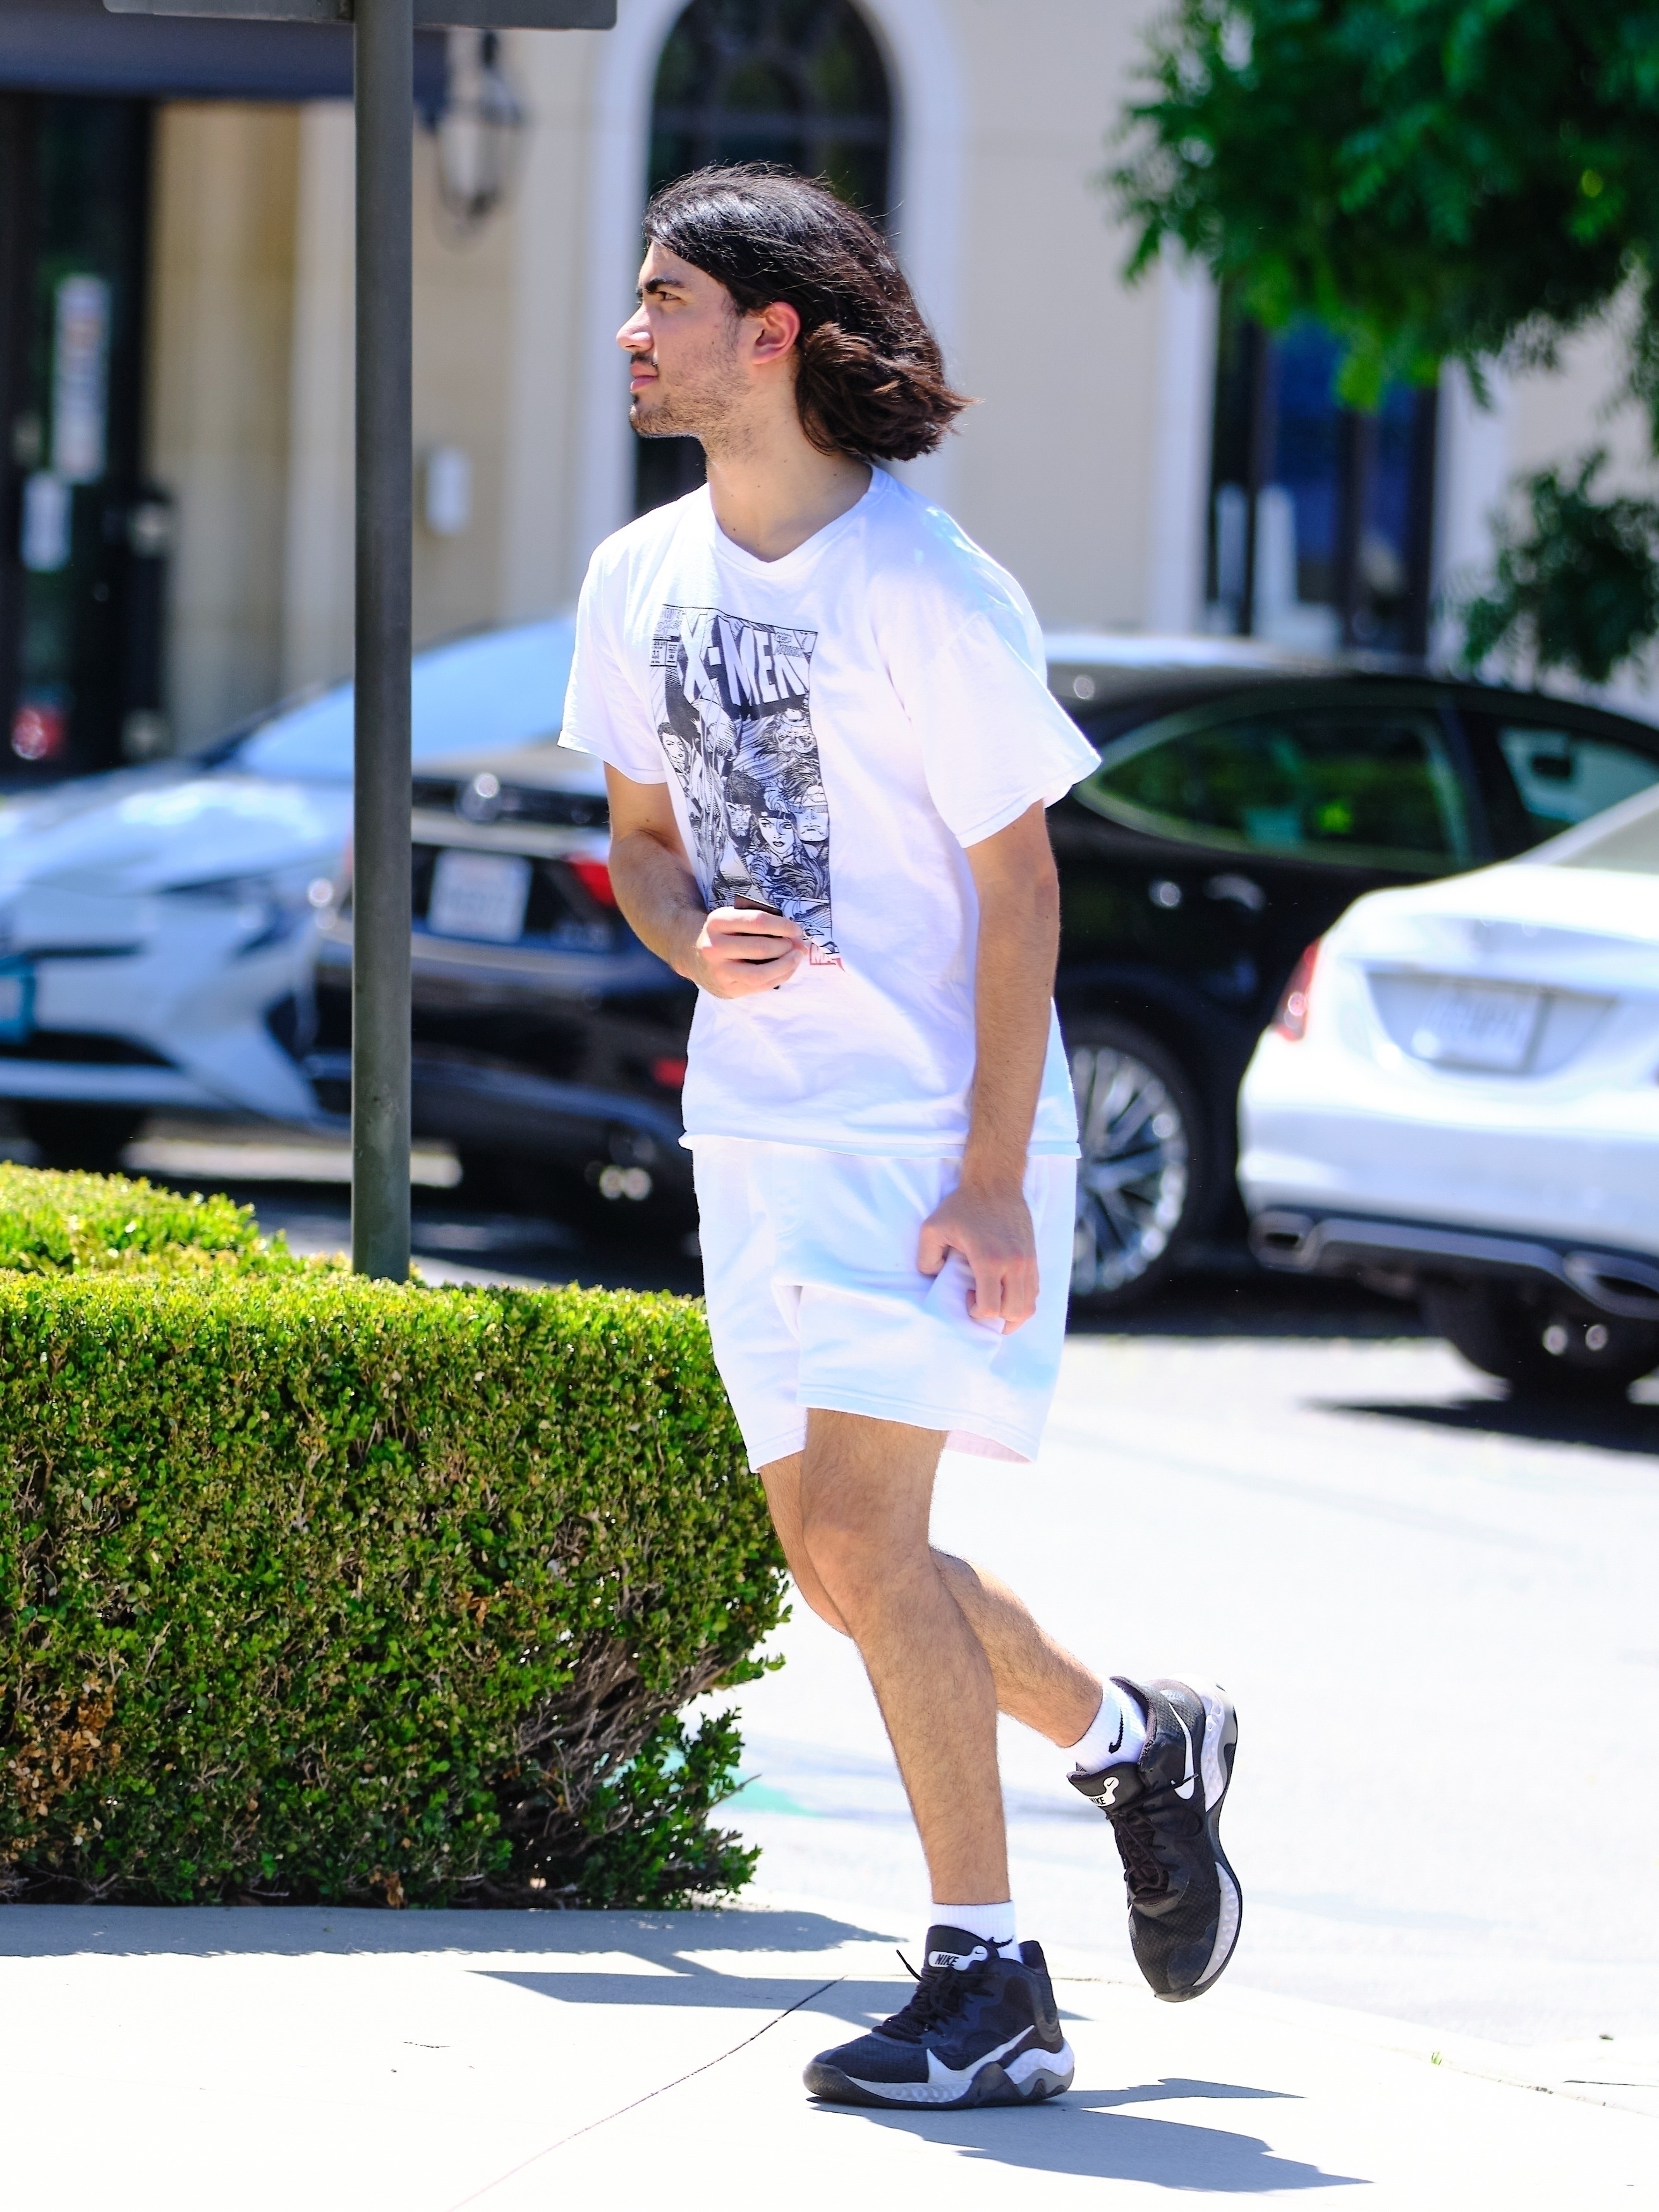 He wore white shorts, a white X-Men T-shirt, and Nike sneakers